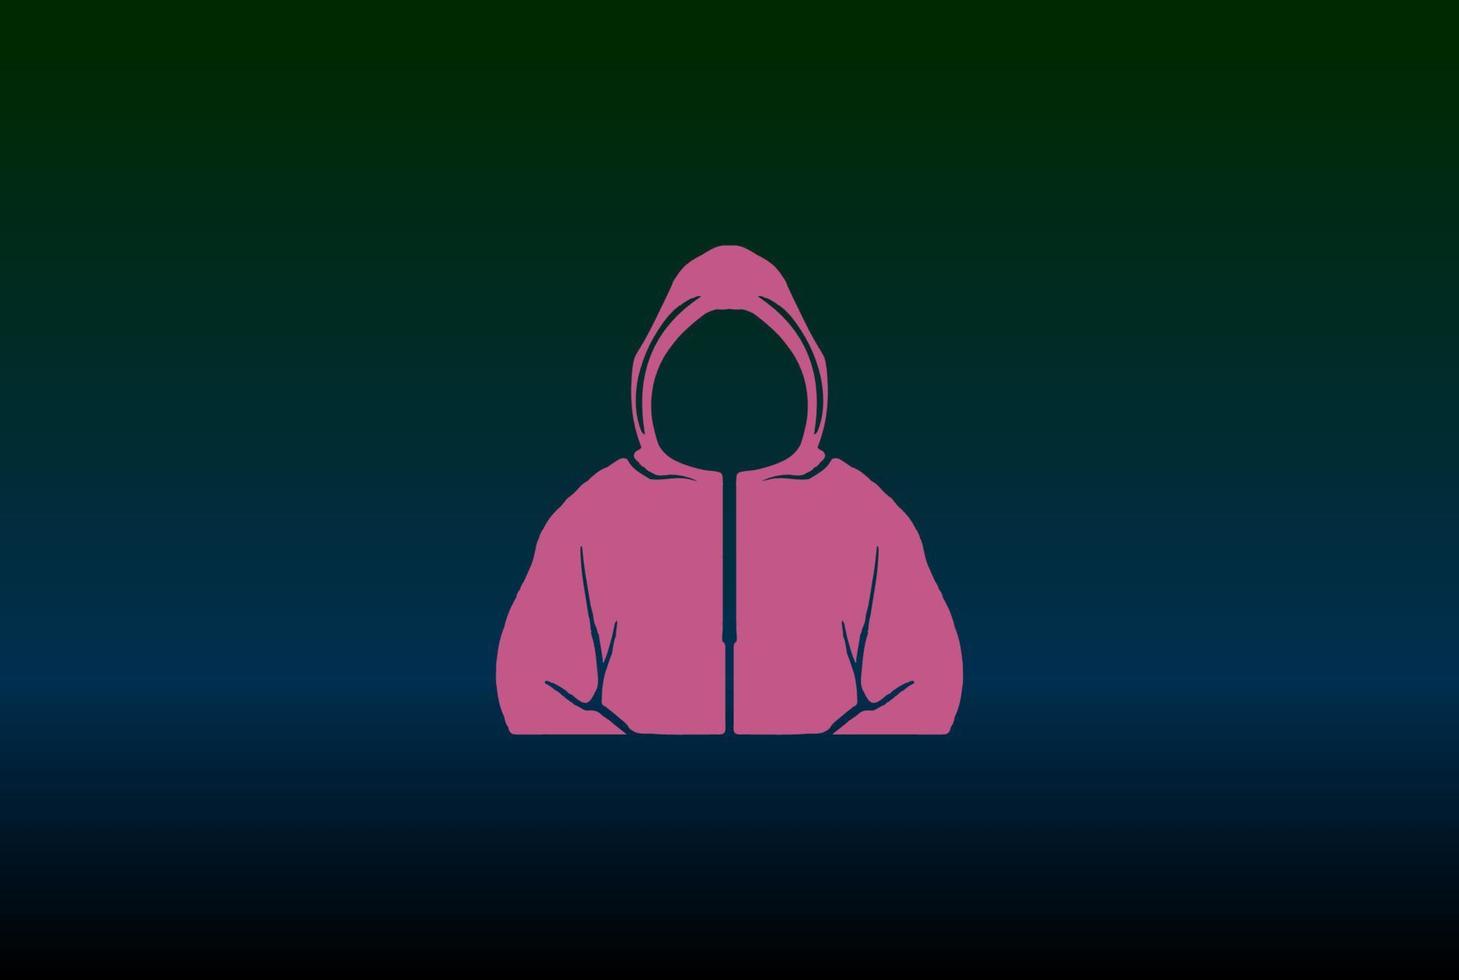 Mysterious Man Male with Pink Jacket Logo Design Vector